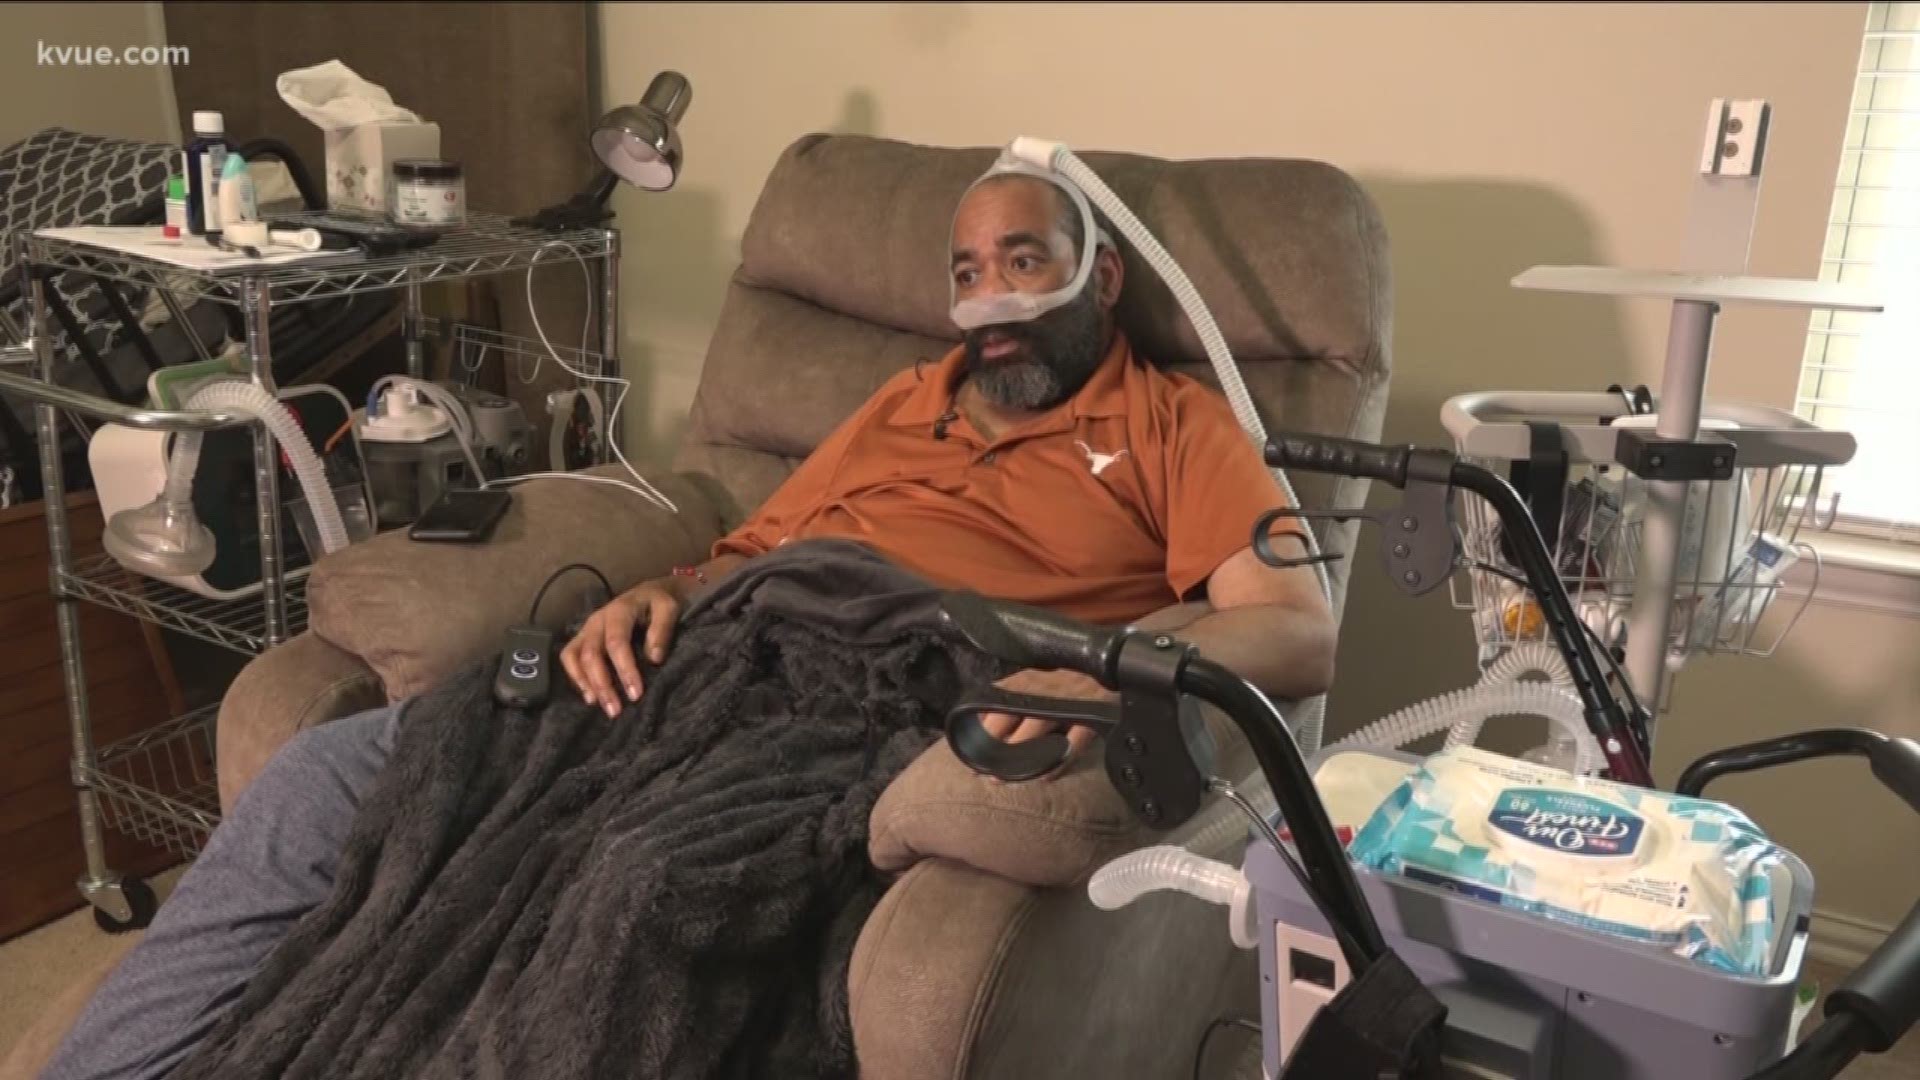 The Austin community is rallying behind him to help him into a home fit for his condition.